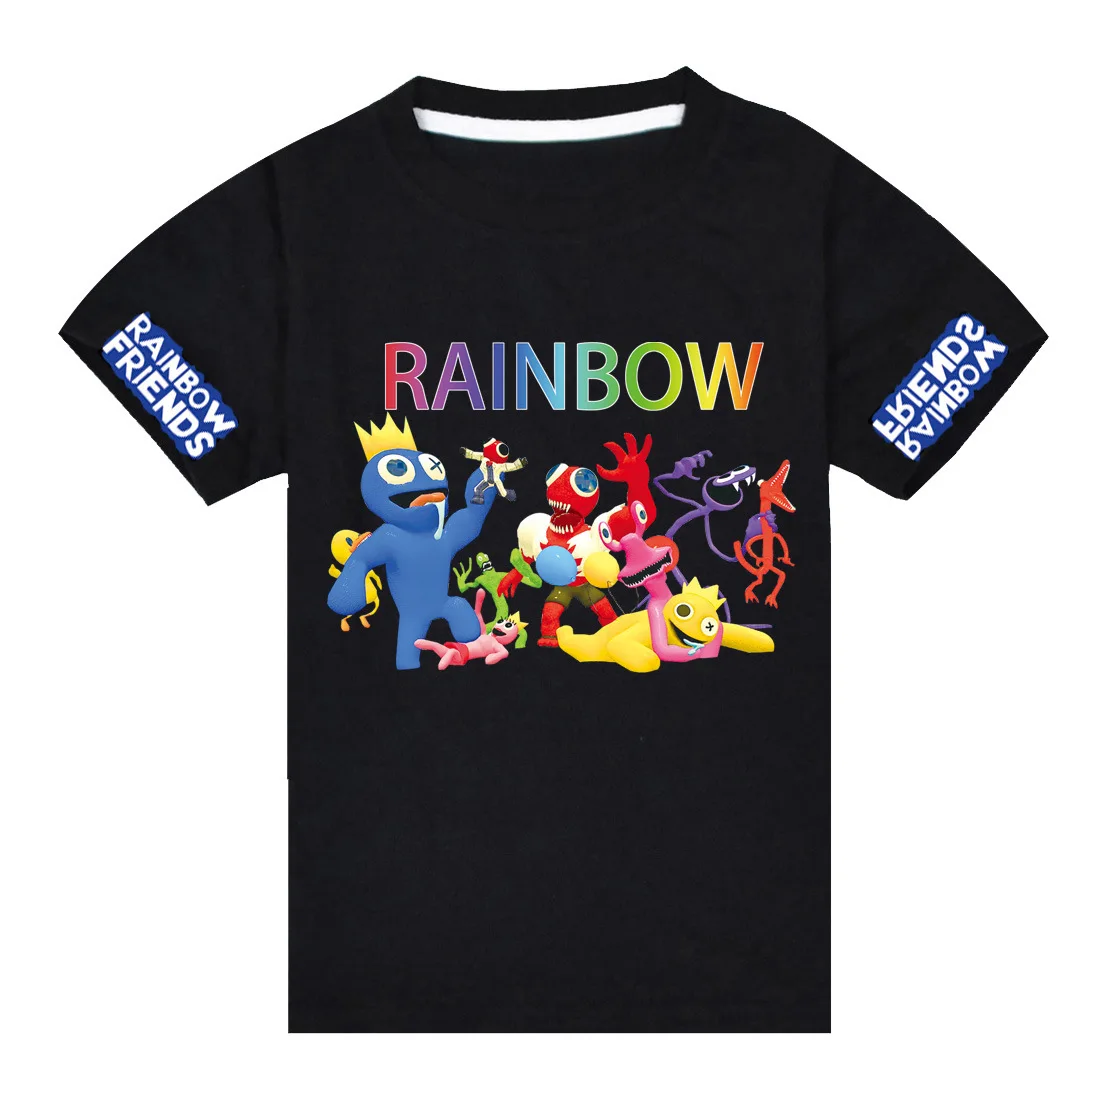 T-shirt Rainbow Friends Children's Short-sleeved Top Middle-aged and Older Children's Casual Short-sleeved Children's Gifts